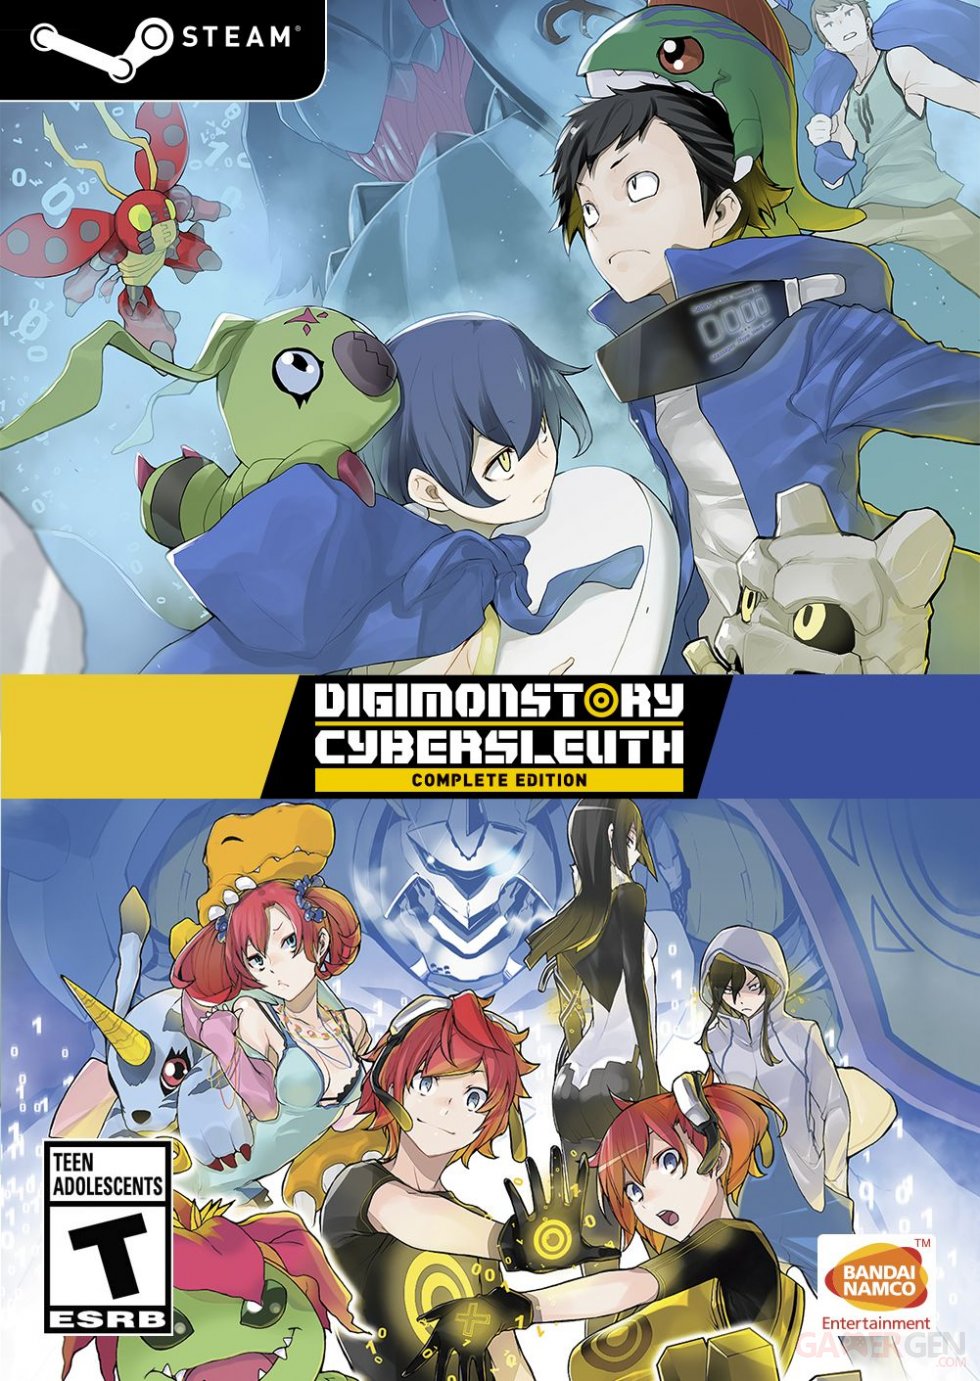 Digimon-Story-Cyber-Sleuth-Complete-Edition-jaquette-PC-01-08-07-2019